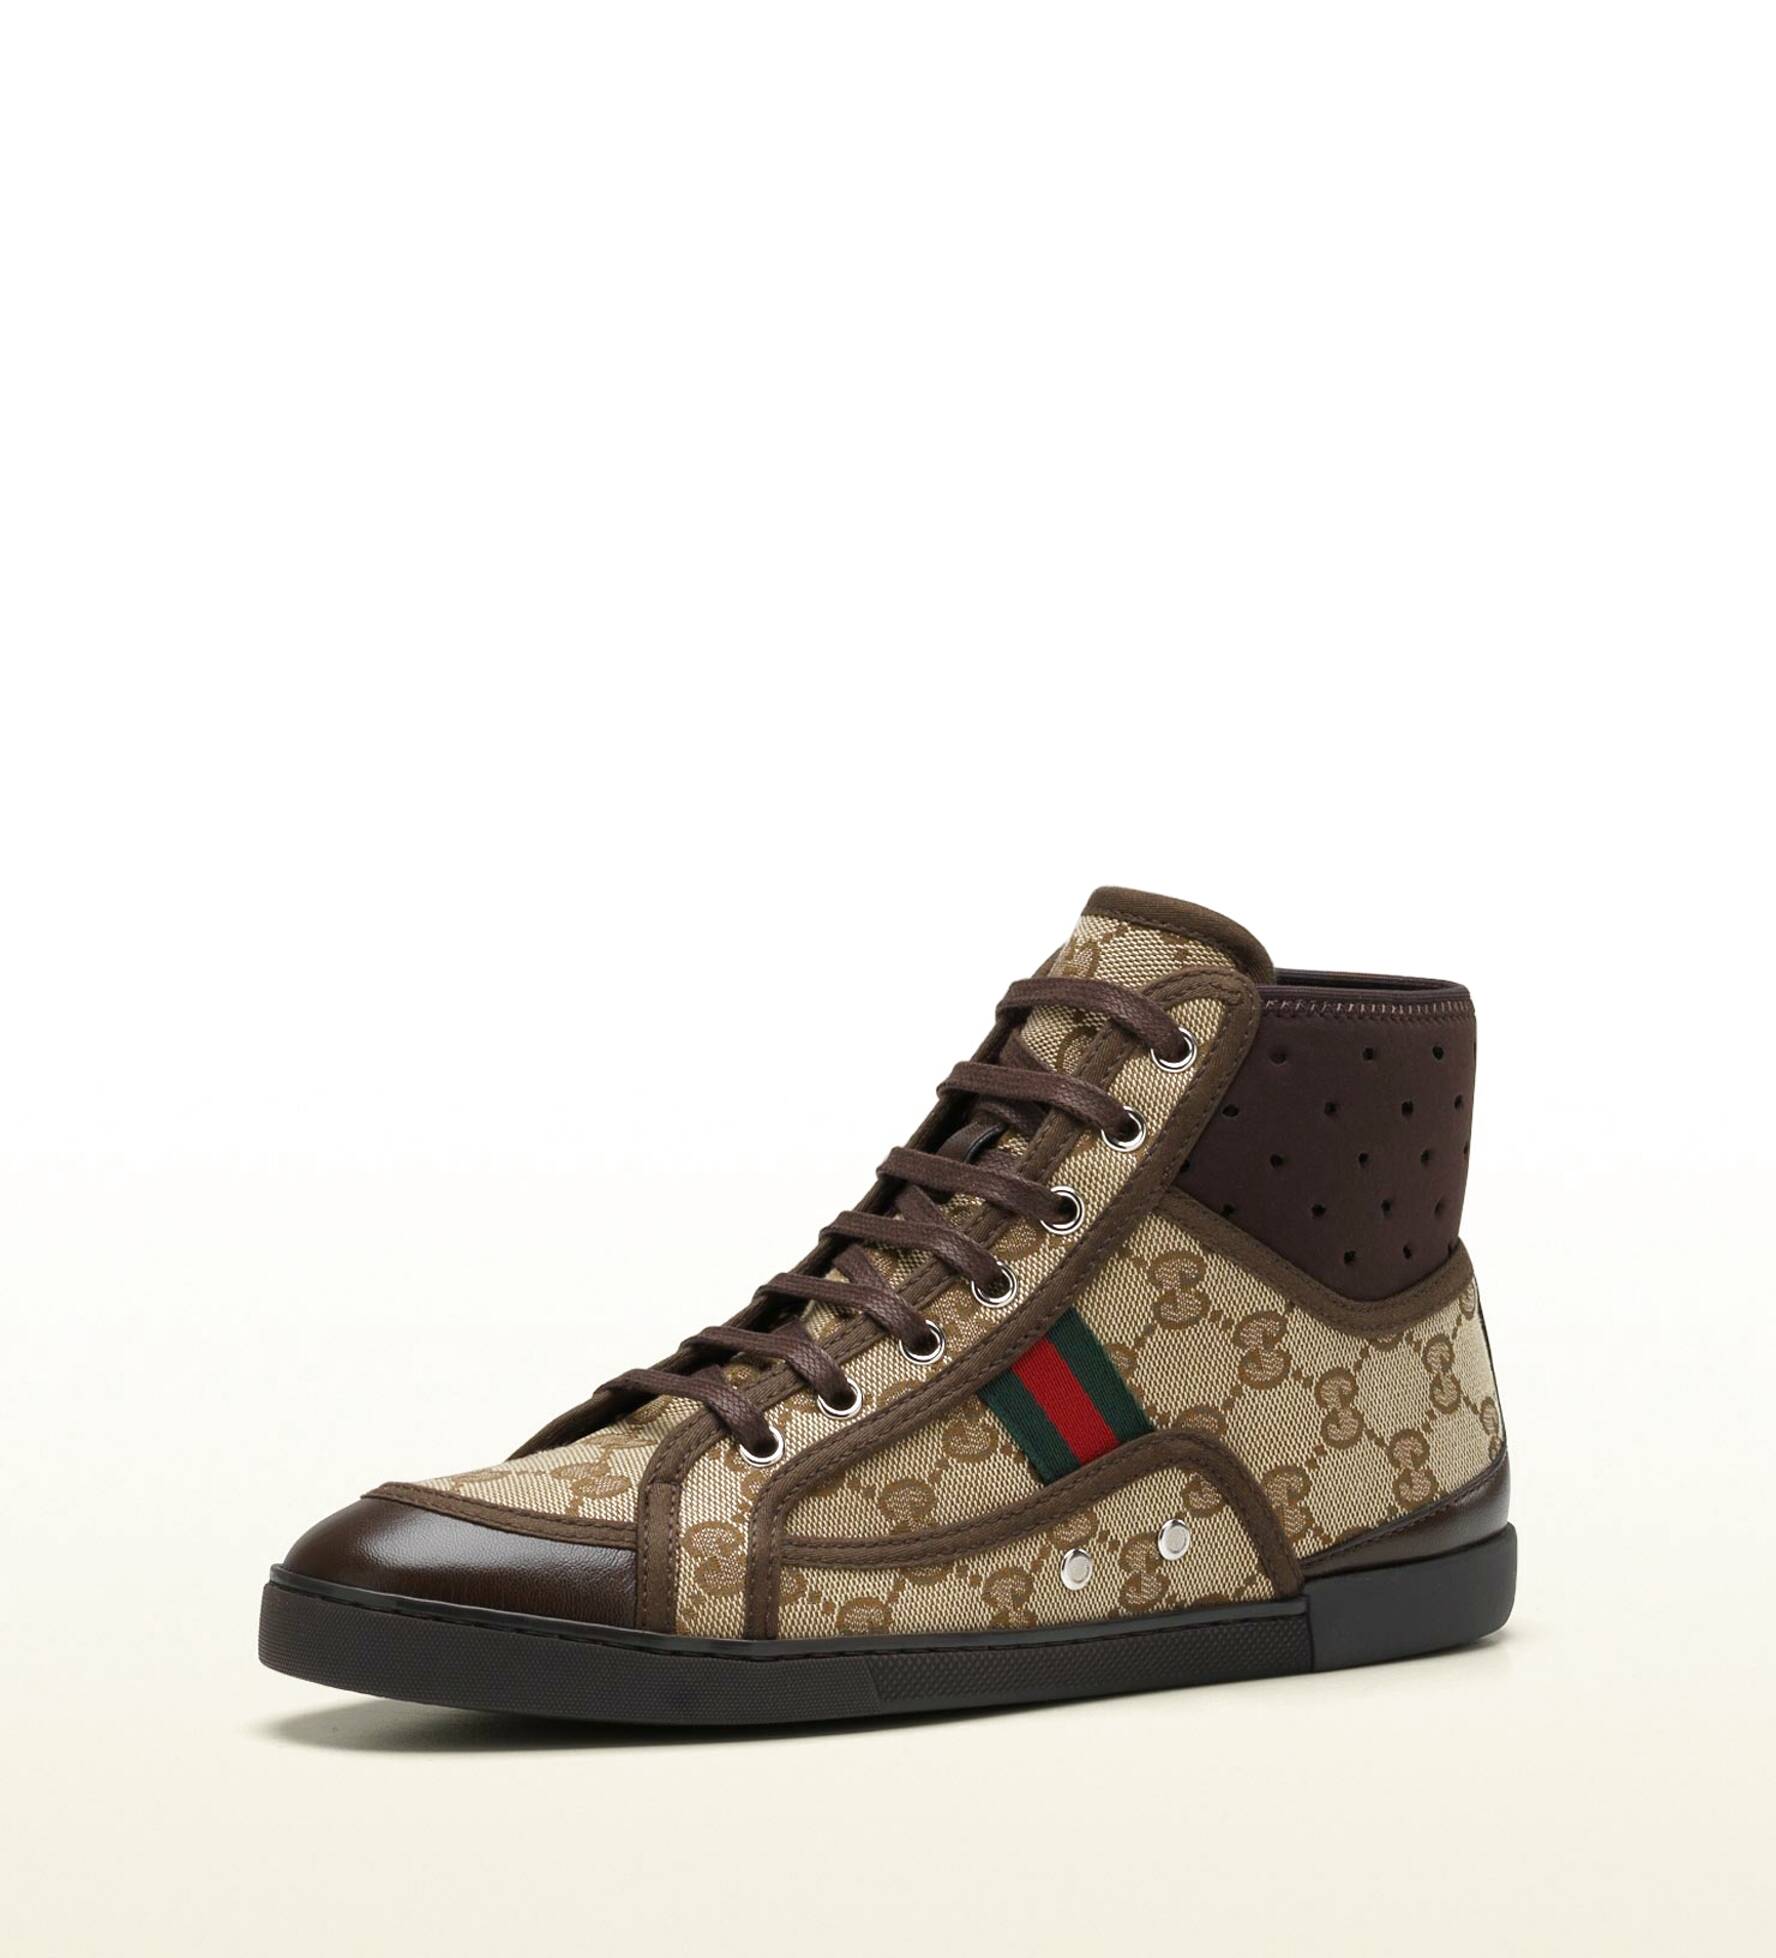 Gucci Sneakers Women for sale in UK | View 36 bargains